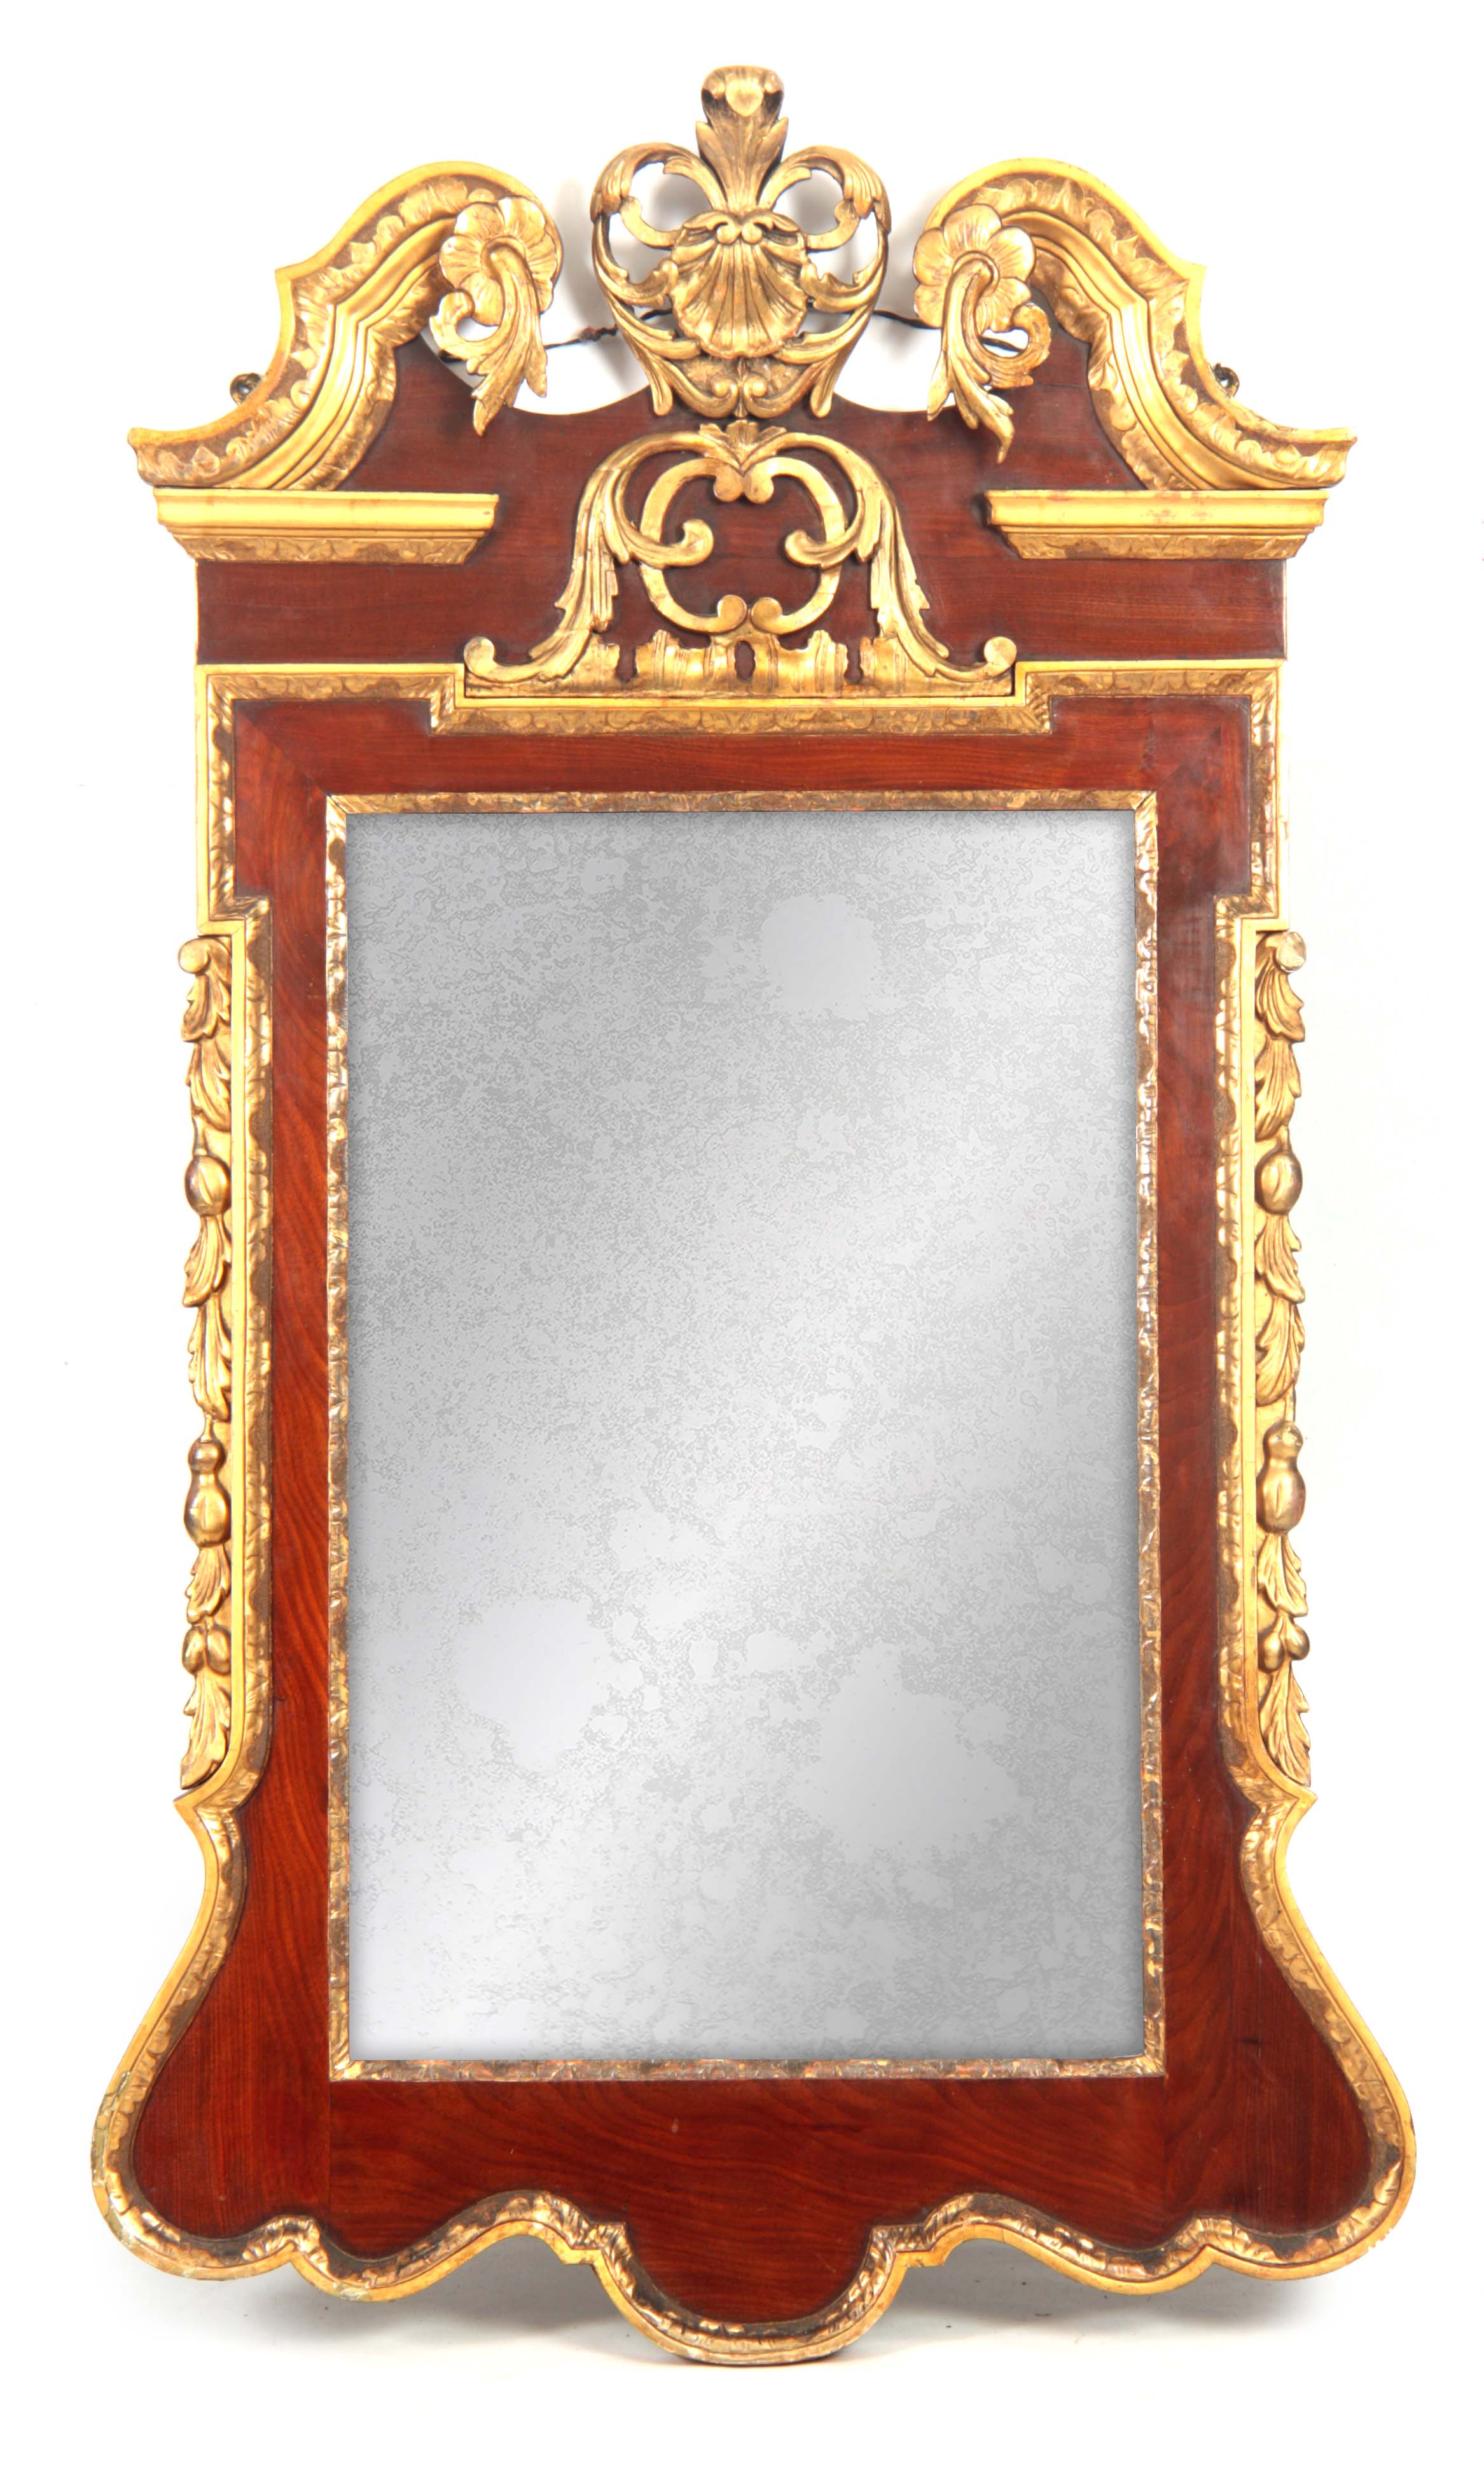 AN 18TH CENTURY MAHOGANY AND PARCEL GILT HANGING MIRROR with elaborate swan neck and shellwork